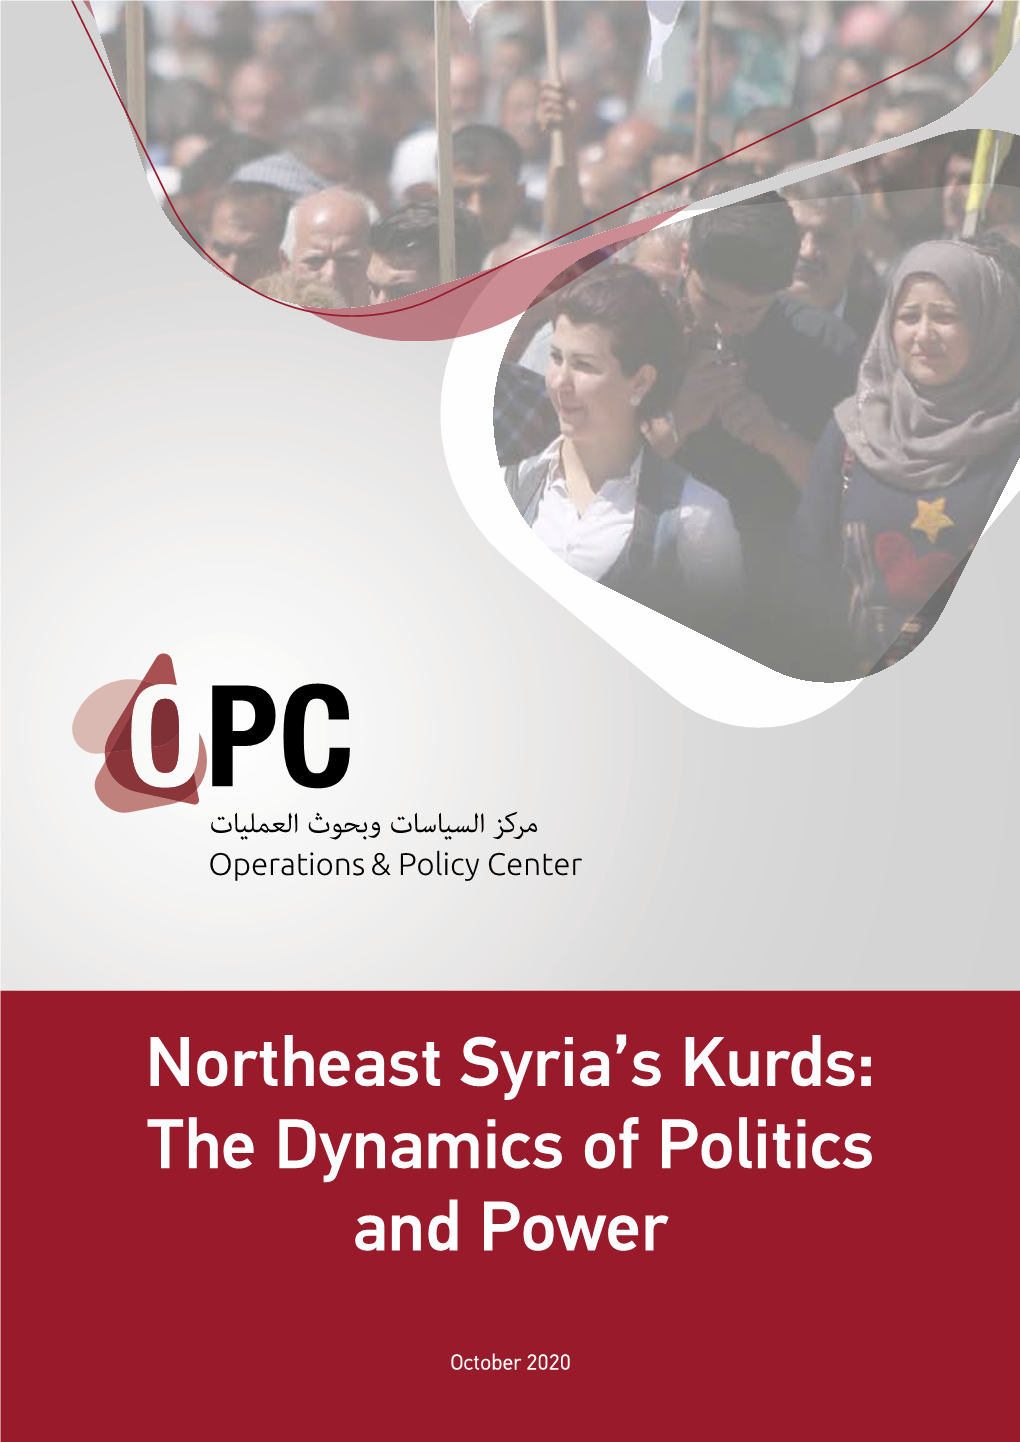 Northeast Syria's Kurds: the Dynamics of Politics and Power